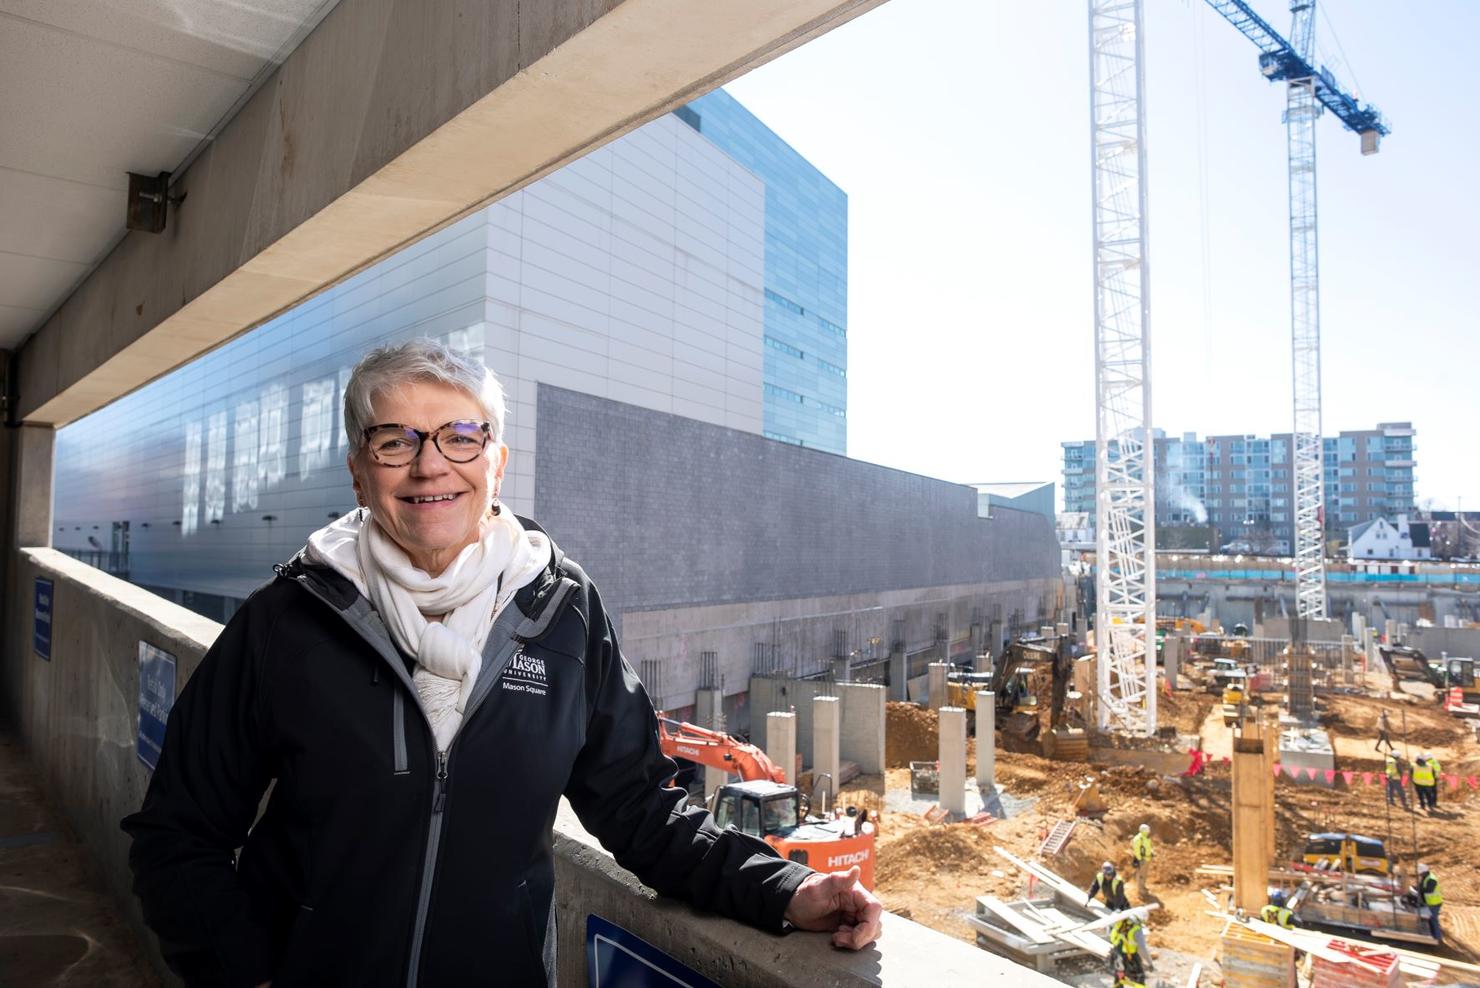 Woman stands inside a parking garage overlooking the construction site of Fuse at Mason Square. Cranes line the sky with other tall buildings in the background